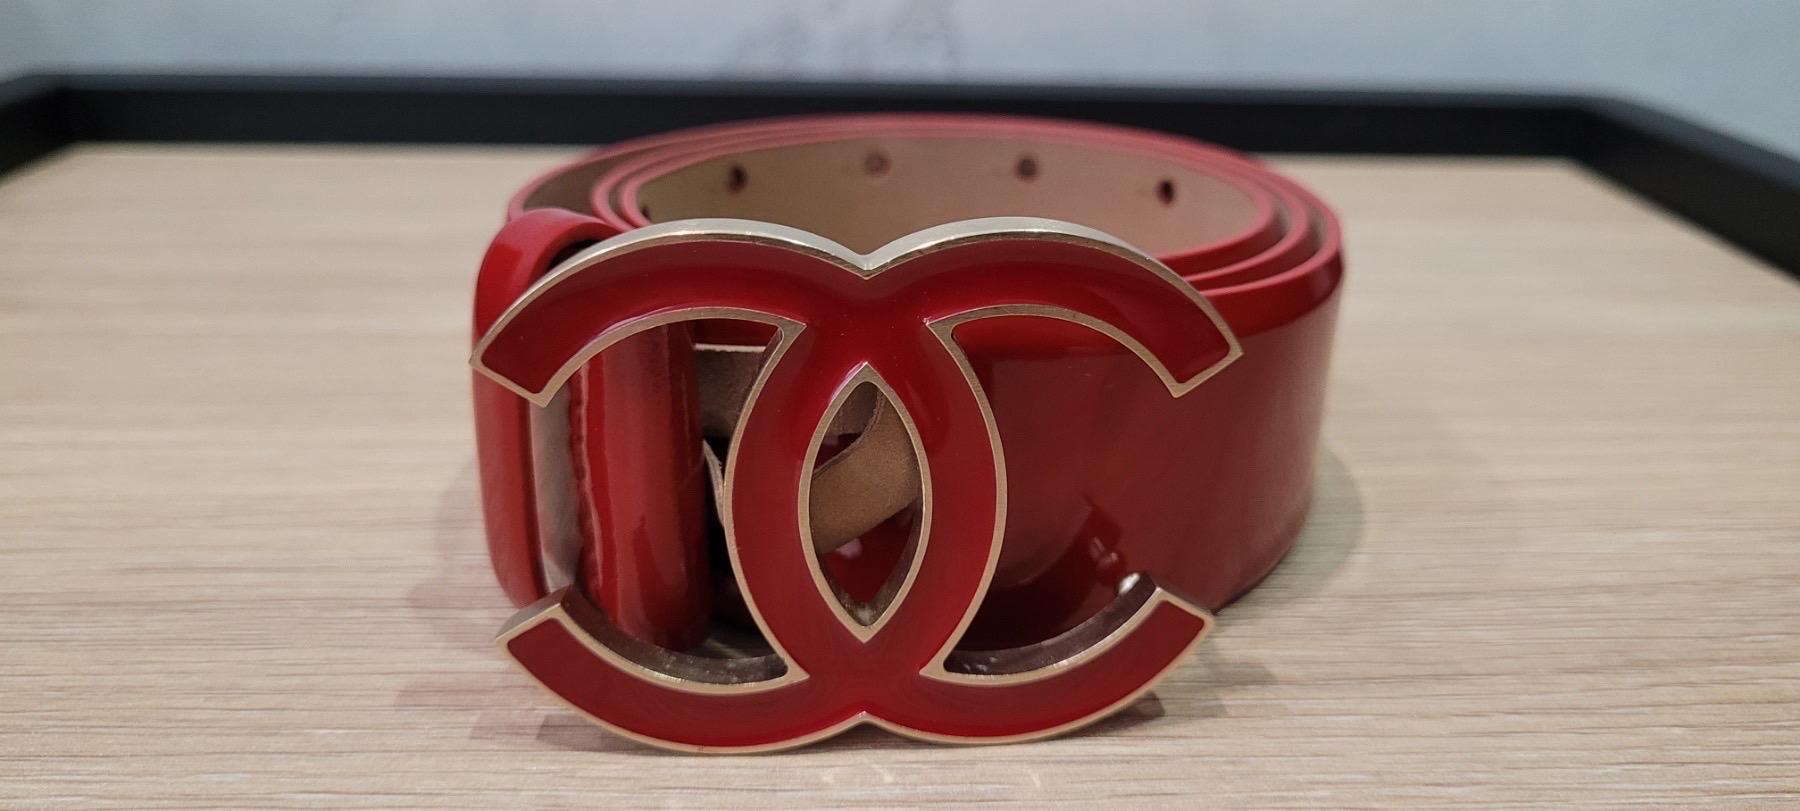 The Chanel belt is made of red patent leather.
The elegant design is complemented by the signature CC buckle on the front, adjustable with 5 holes, minimum 69 cm, maximum 79 cm. Length: 88 cm
Composition: 100% leather
Width: 4 cm
Condition: